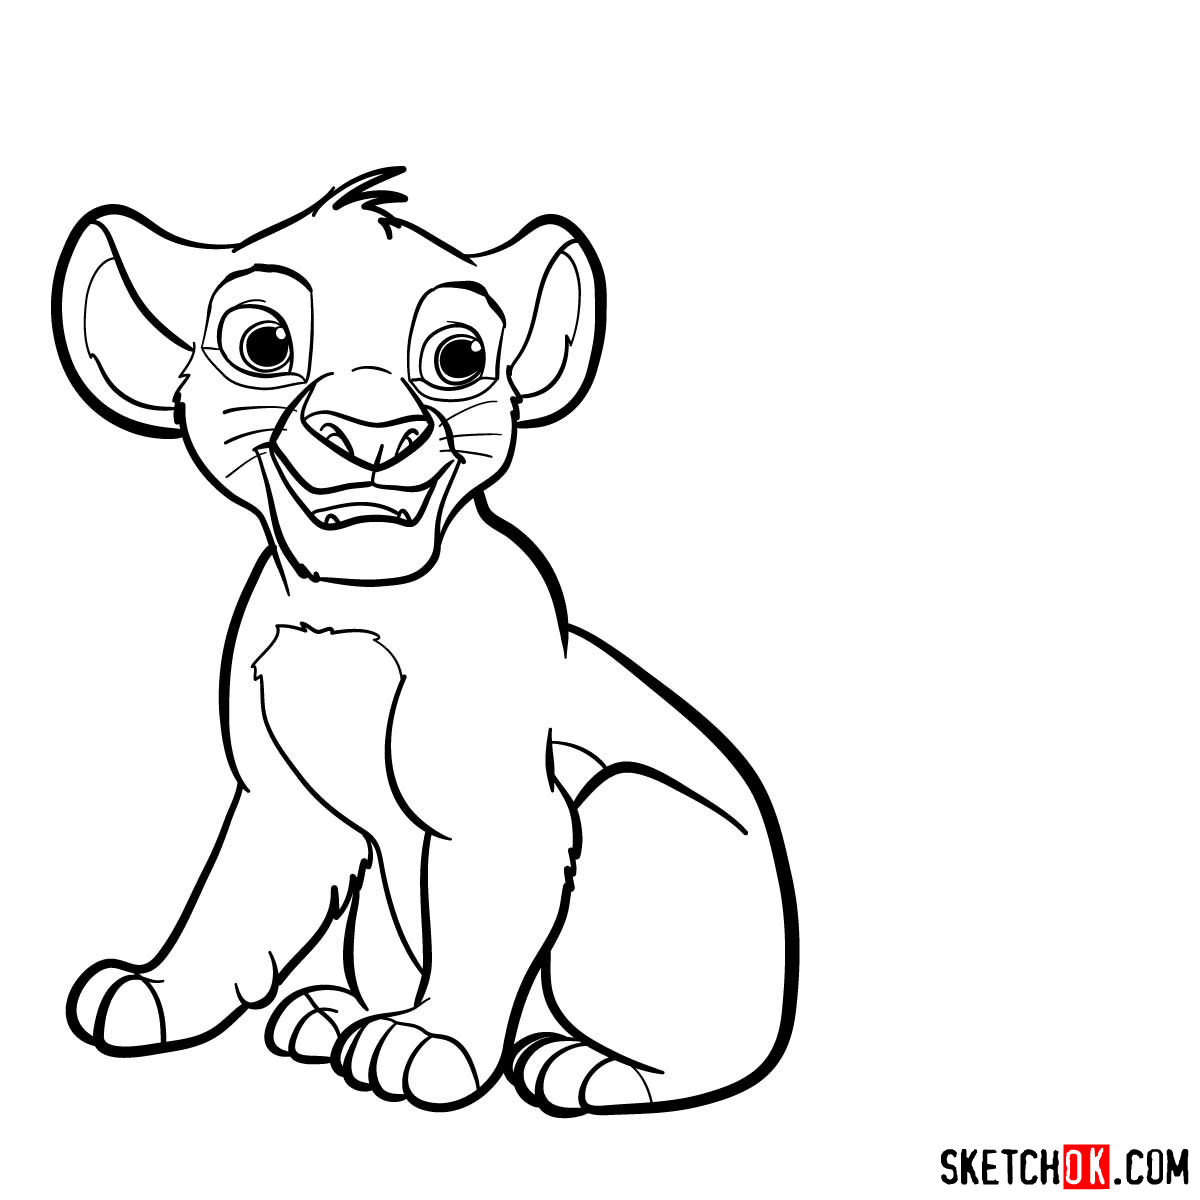 How to draw little Simba| Lion King